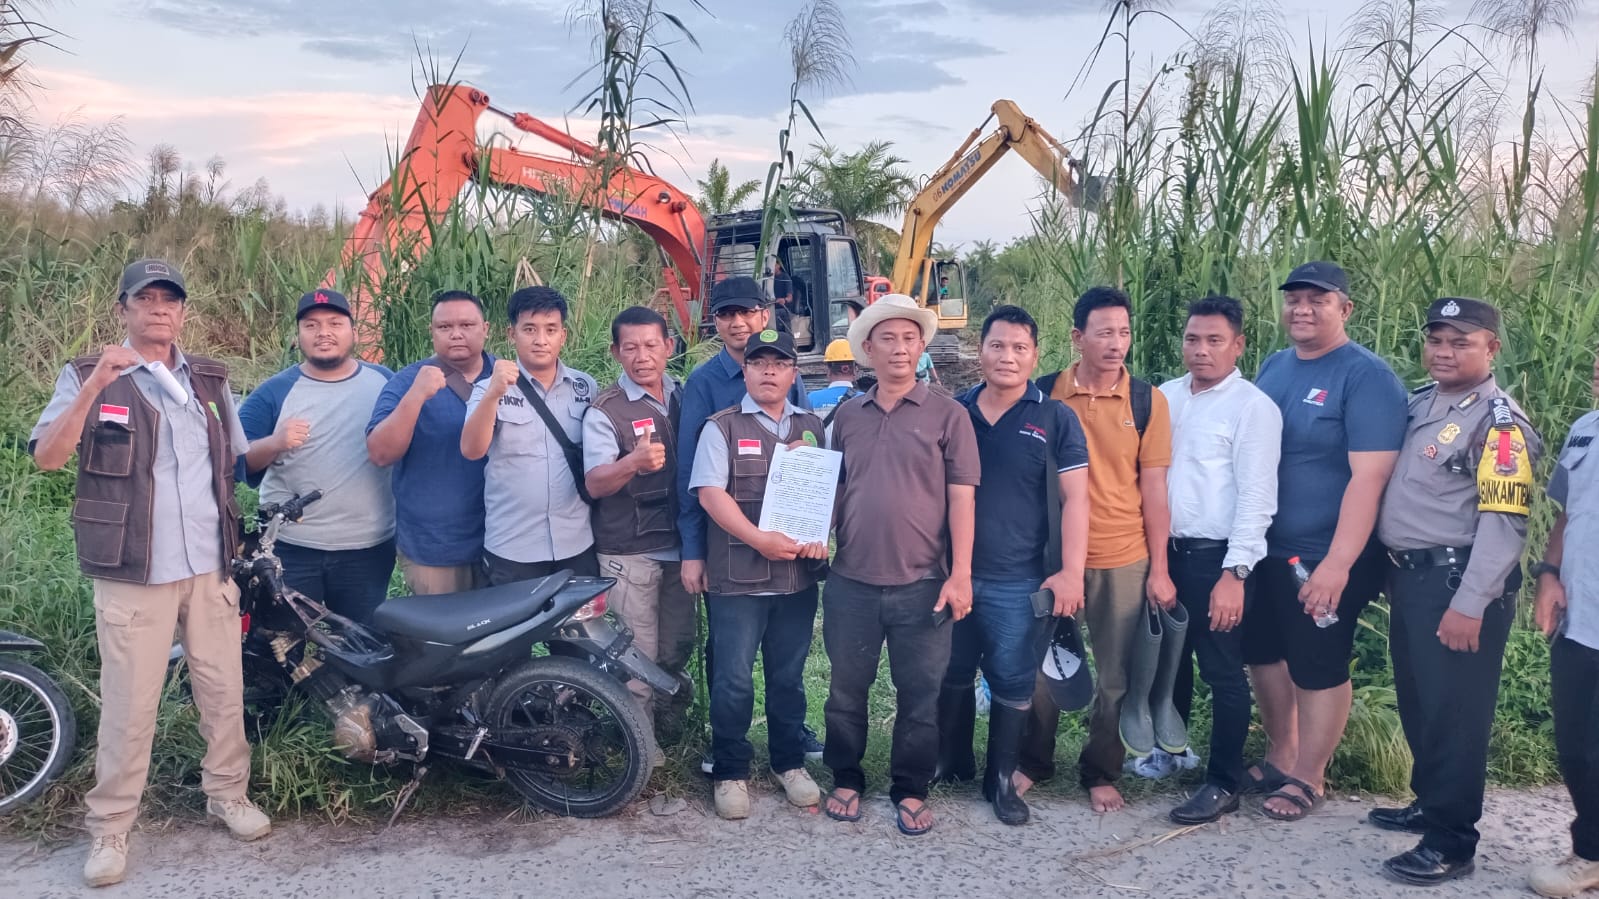 Final Verdict Issued, Execution of Kuala Tanjung Industrial Area Land Carried Out